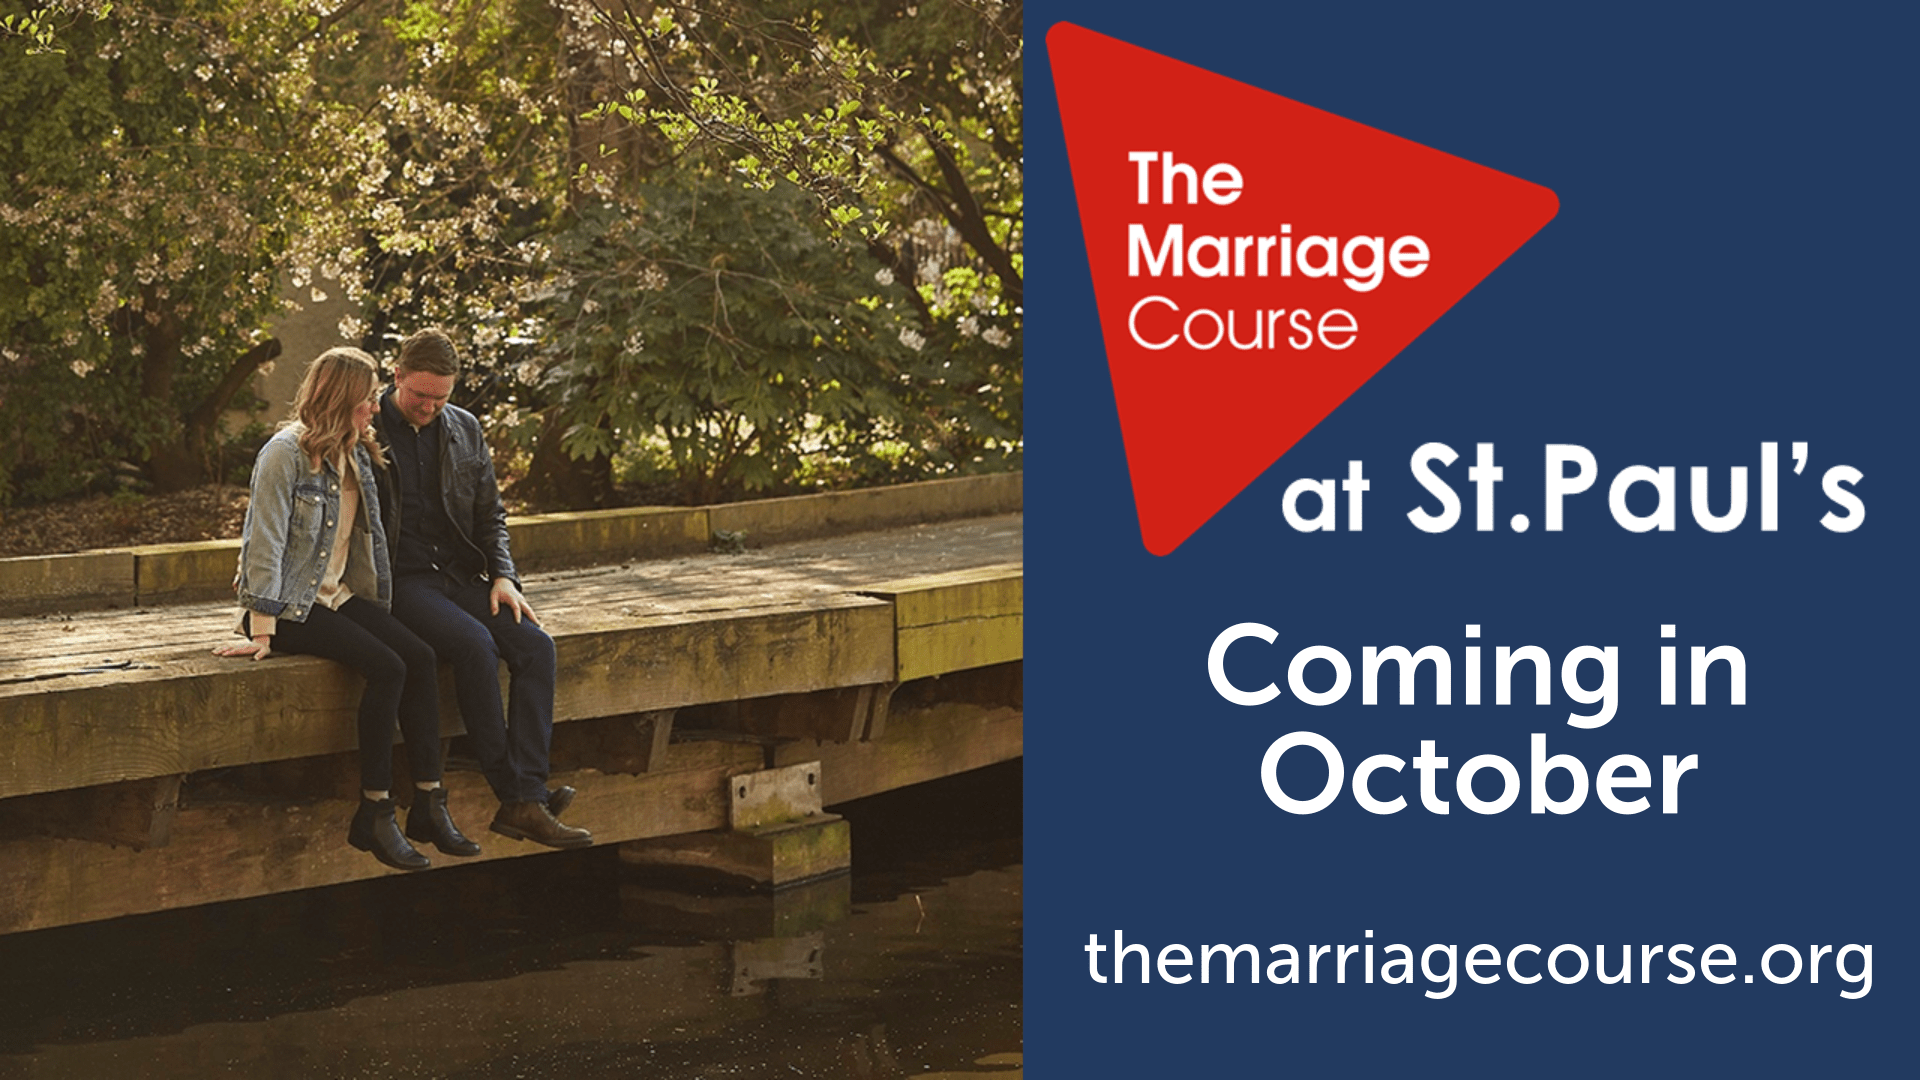 The Marriage Course at St.Paul’s